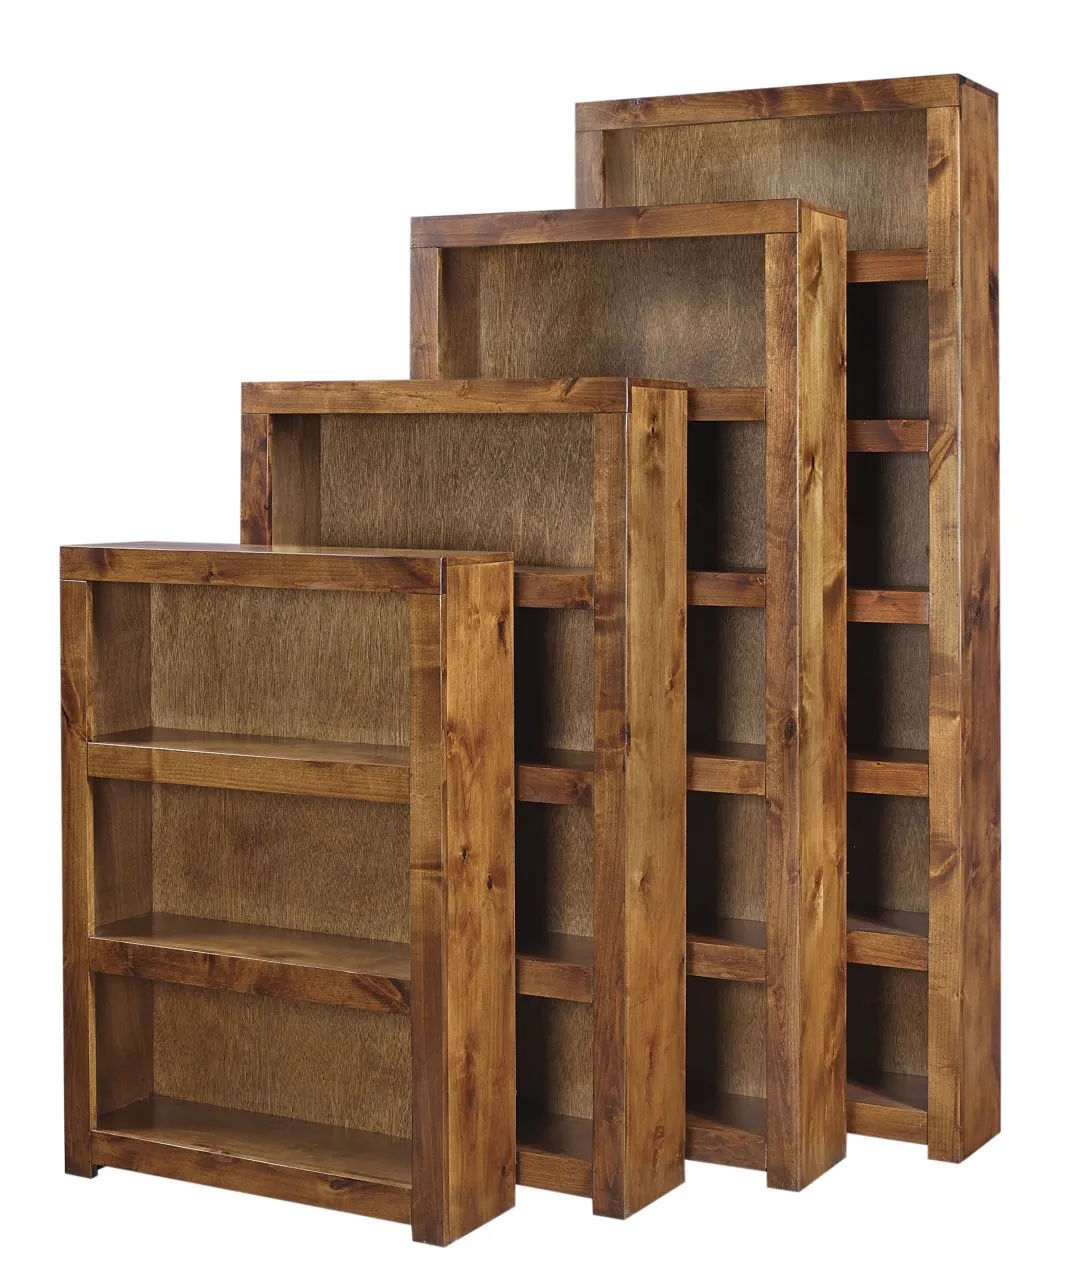 CONTEMPORARY ALDER LIFESTYLE FRUITWOOD 48 INCH FRUITWOOD BOOKCASES